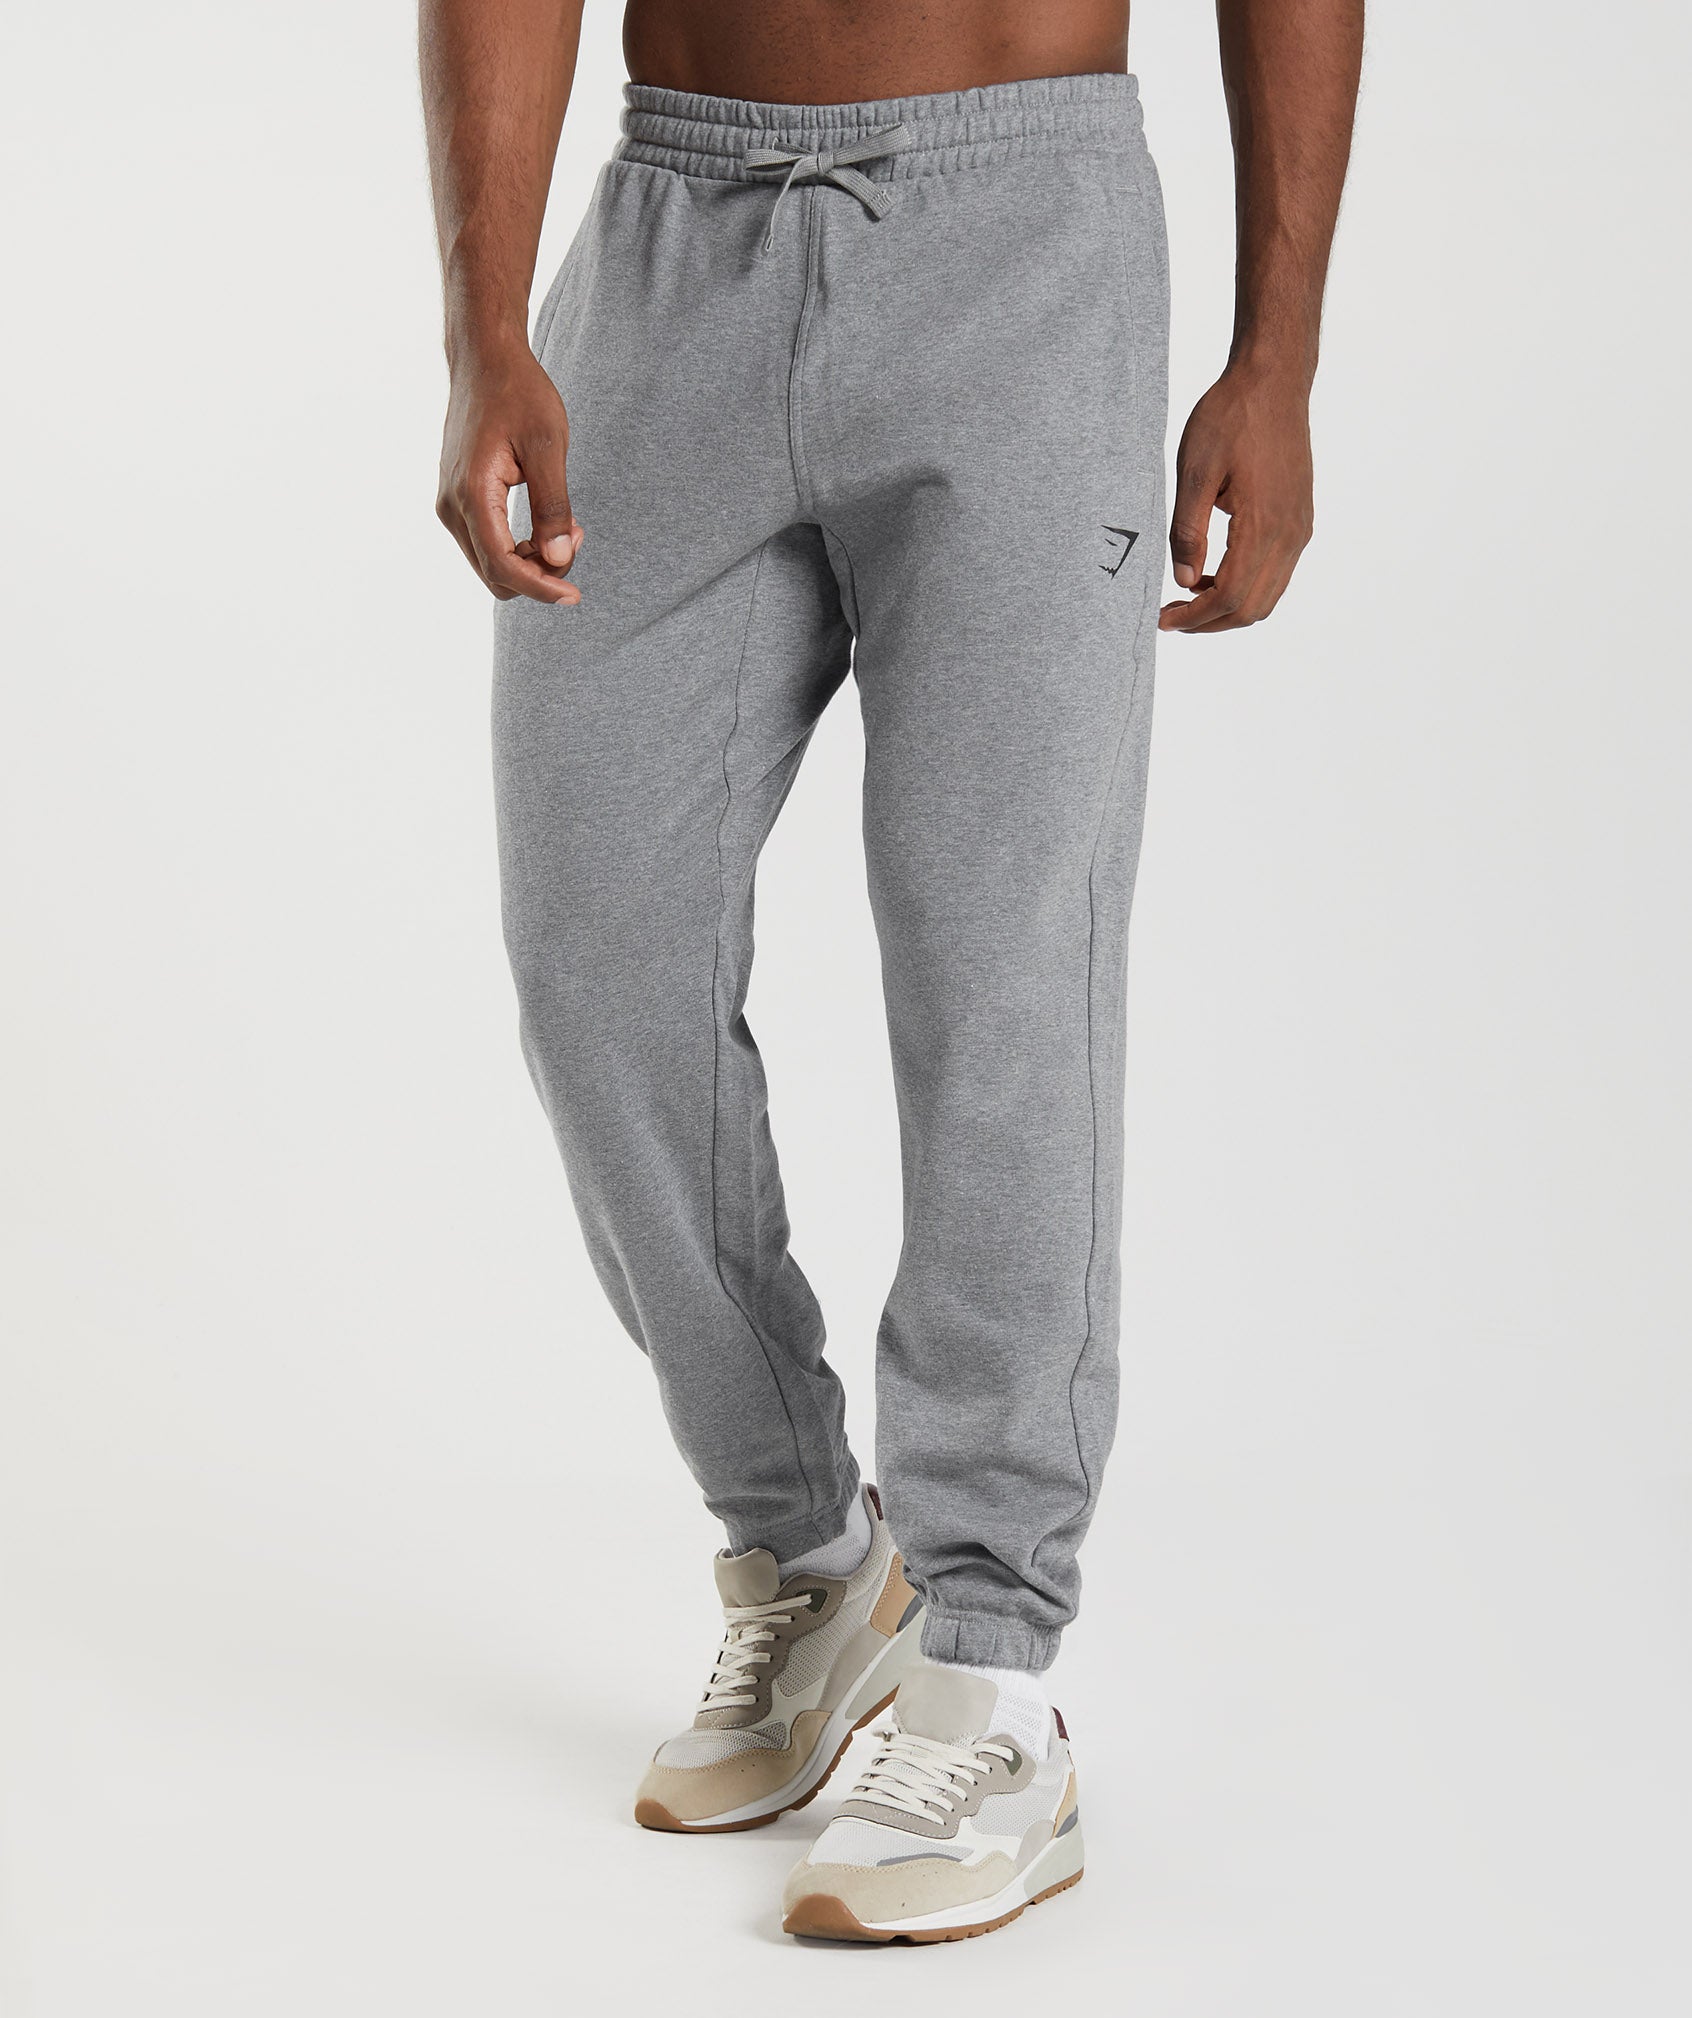 gymshark joggers size guide Hot Sale - OFF 55%